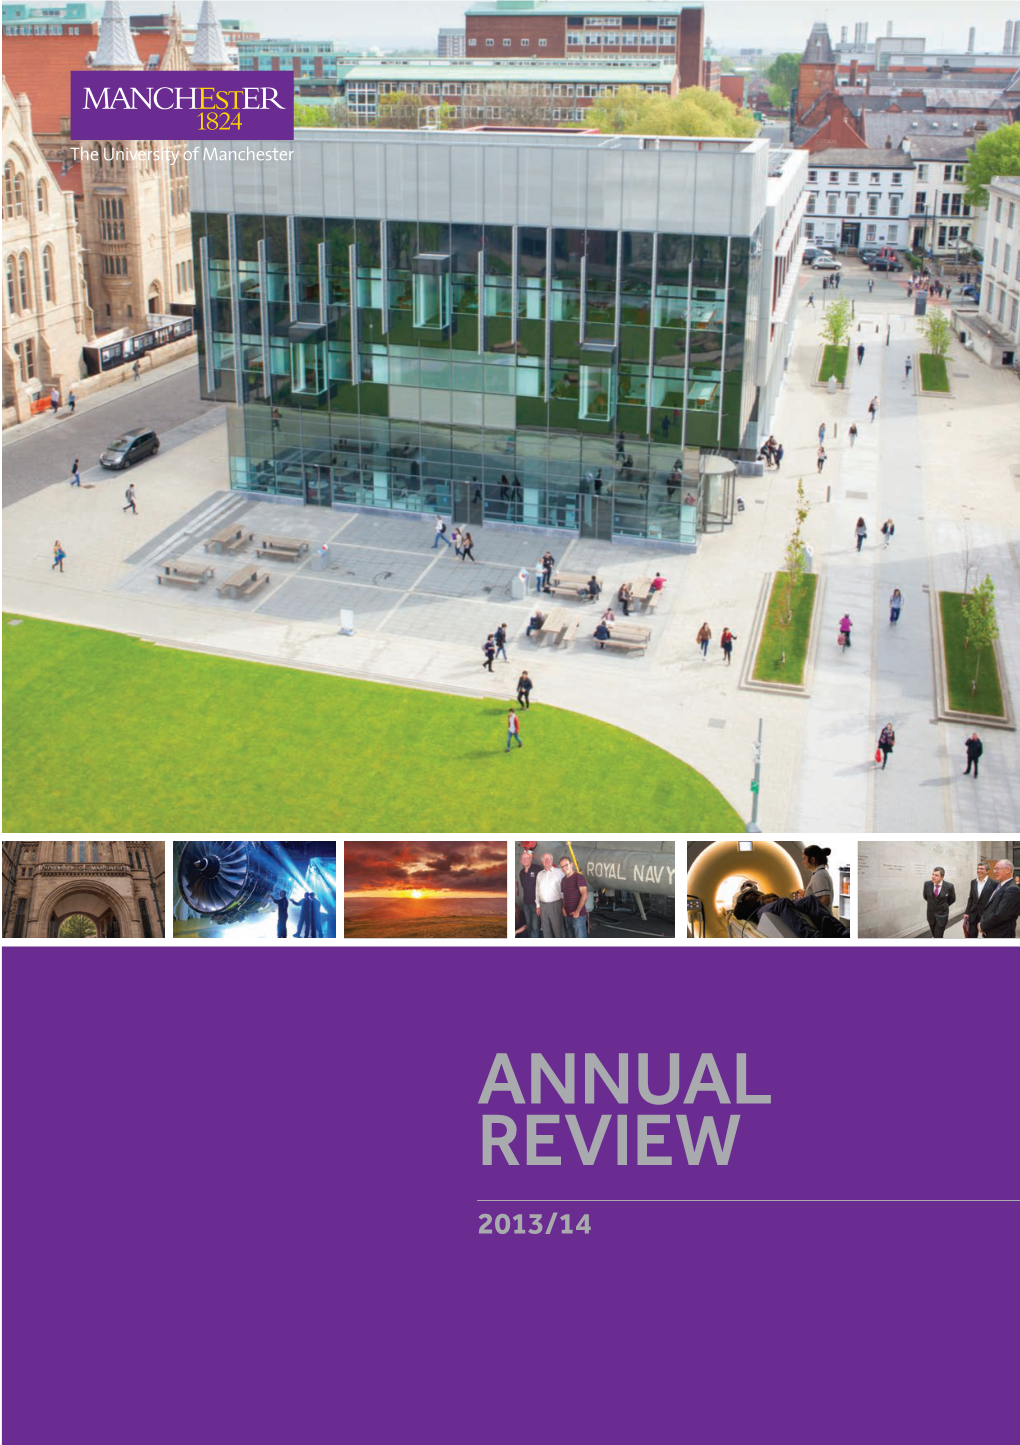 Annual Review 2014.Qxp Layout 1 15/01/2015 12:10 Page 1